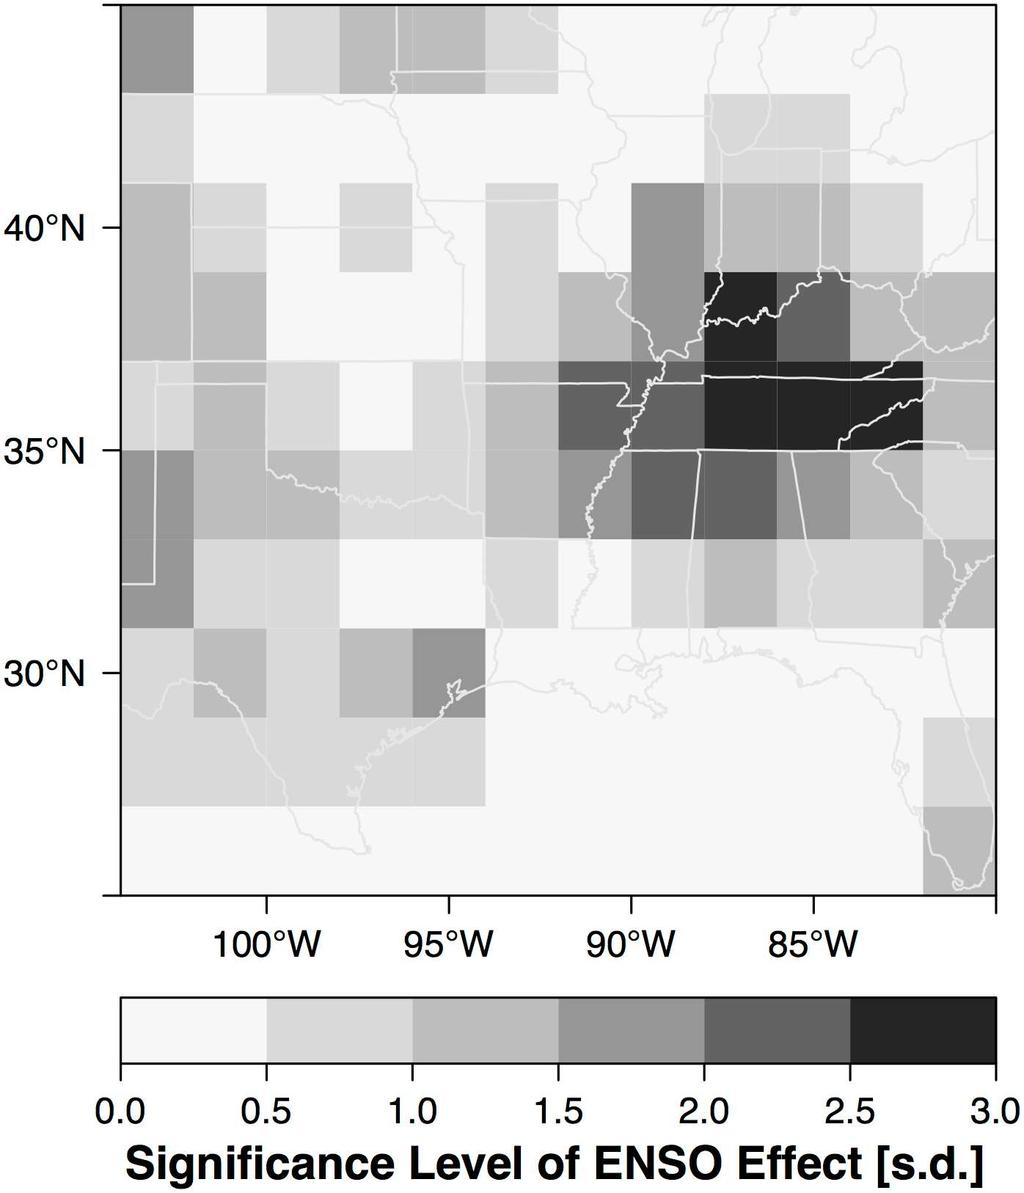 Fig 12. Significance of the ENSO effect on tornadoes in units of standard deviation. doi:10.1371/journal.pone.0166895.